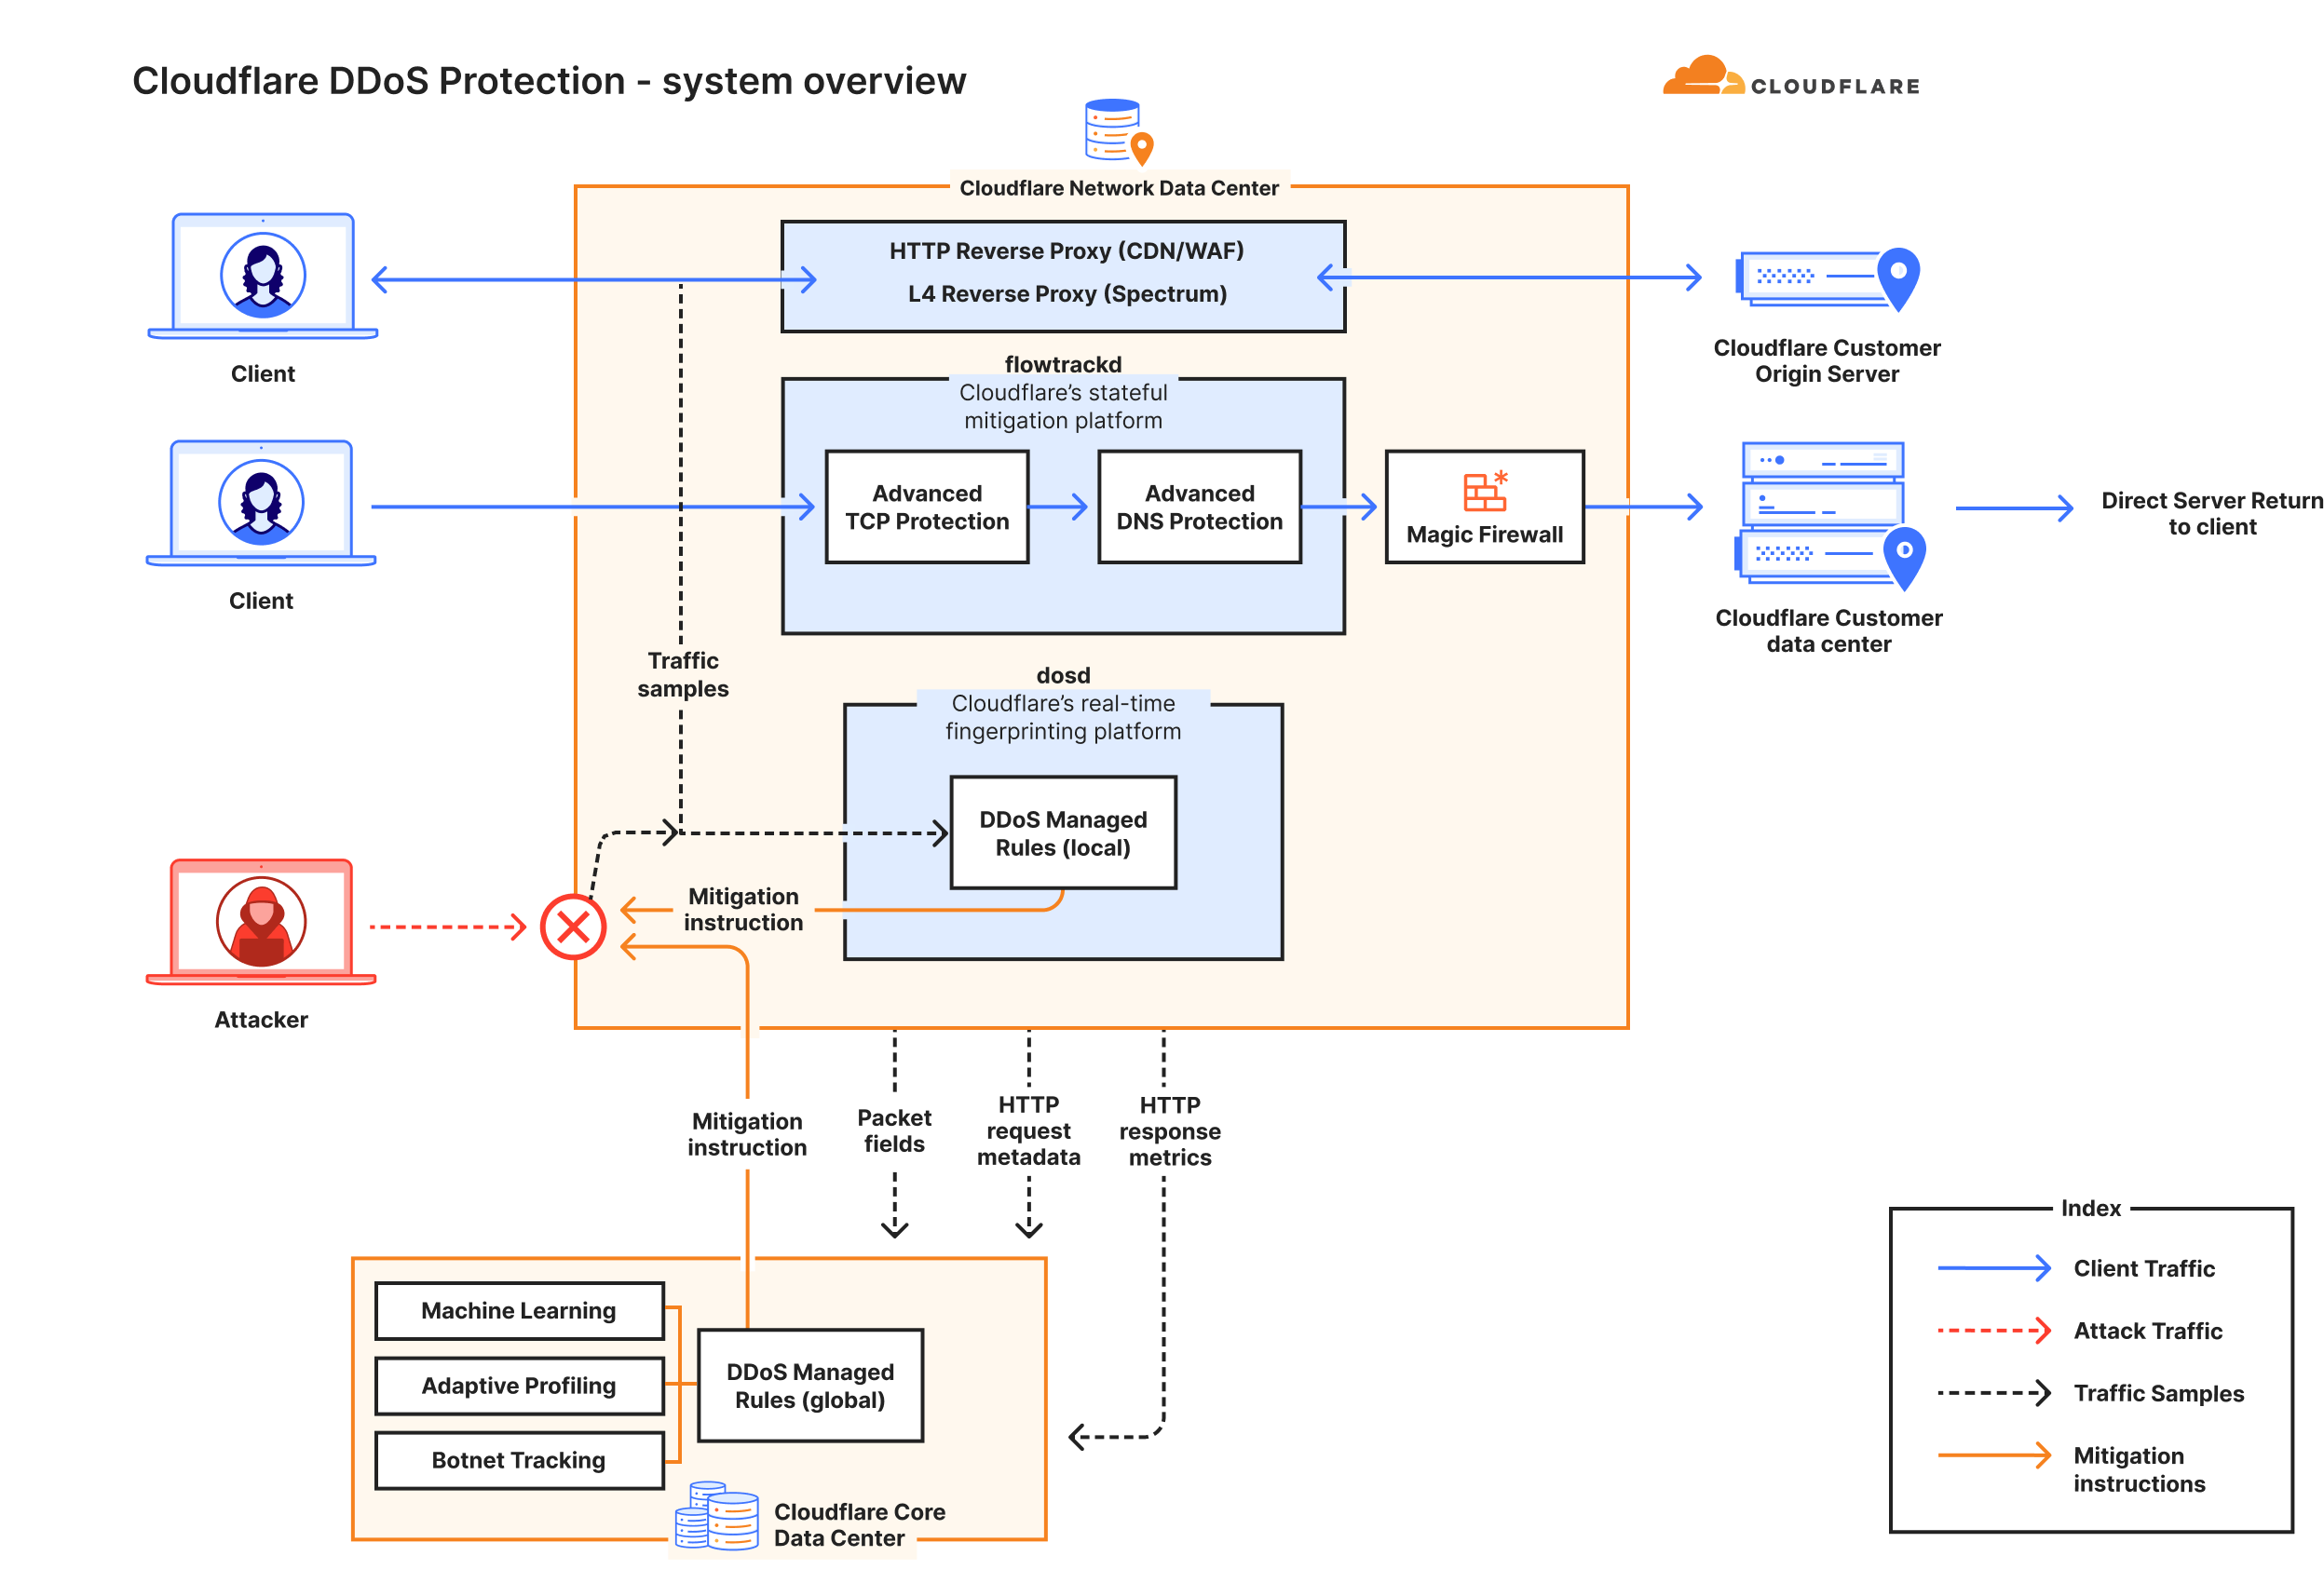 Diagram with the main components providing protection against DDoS attacks at Cloudflare